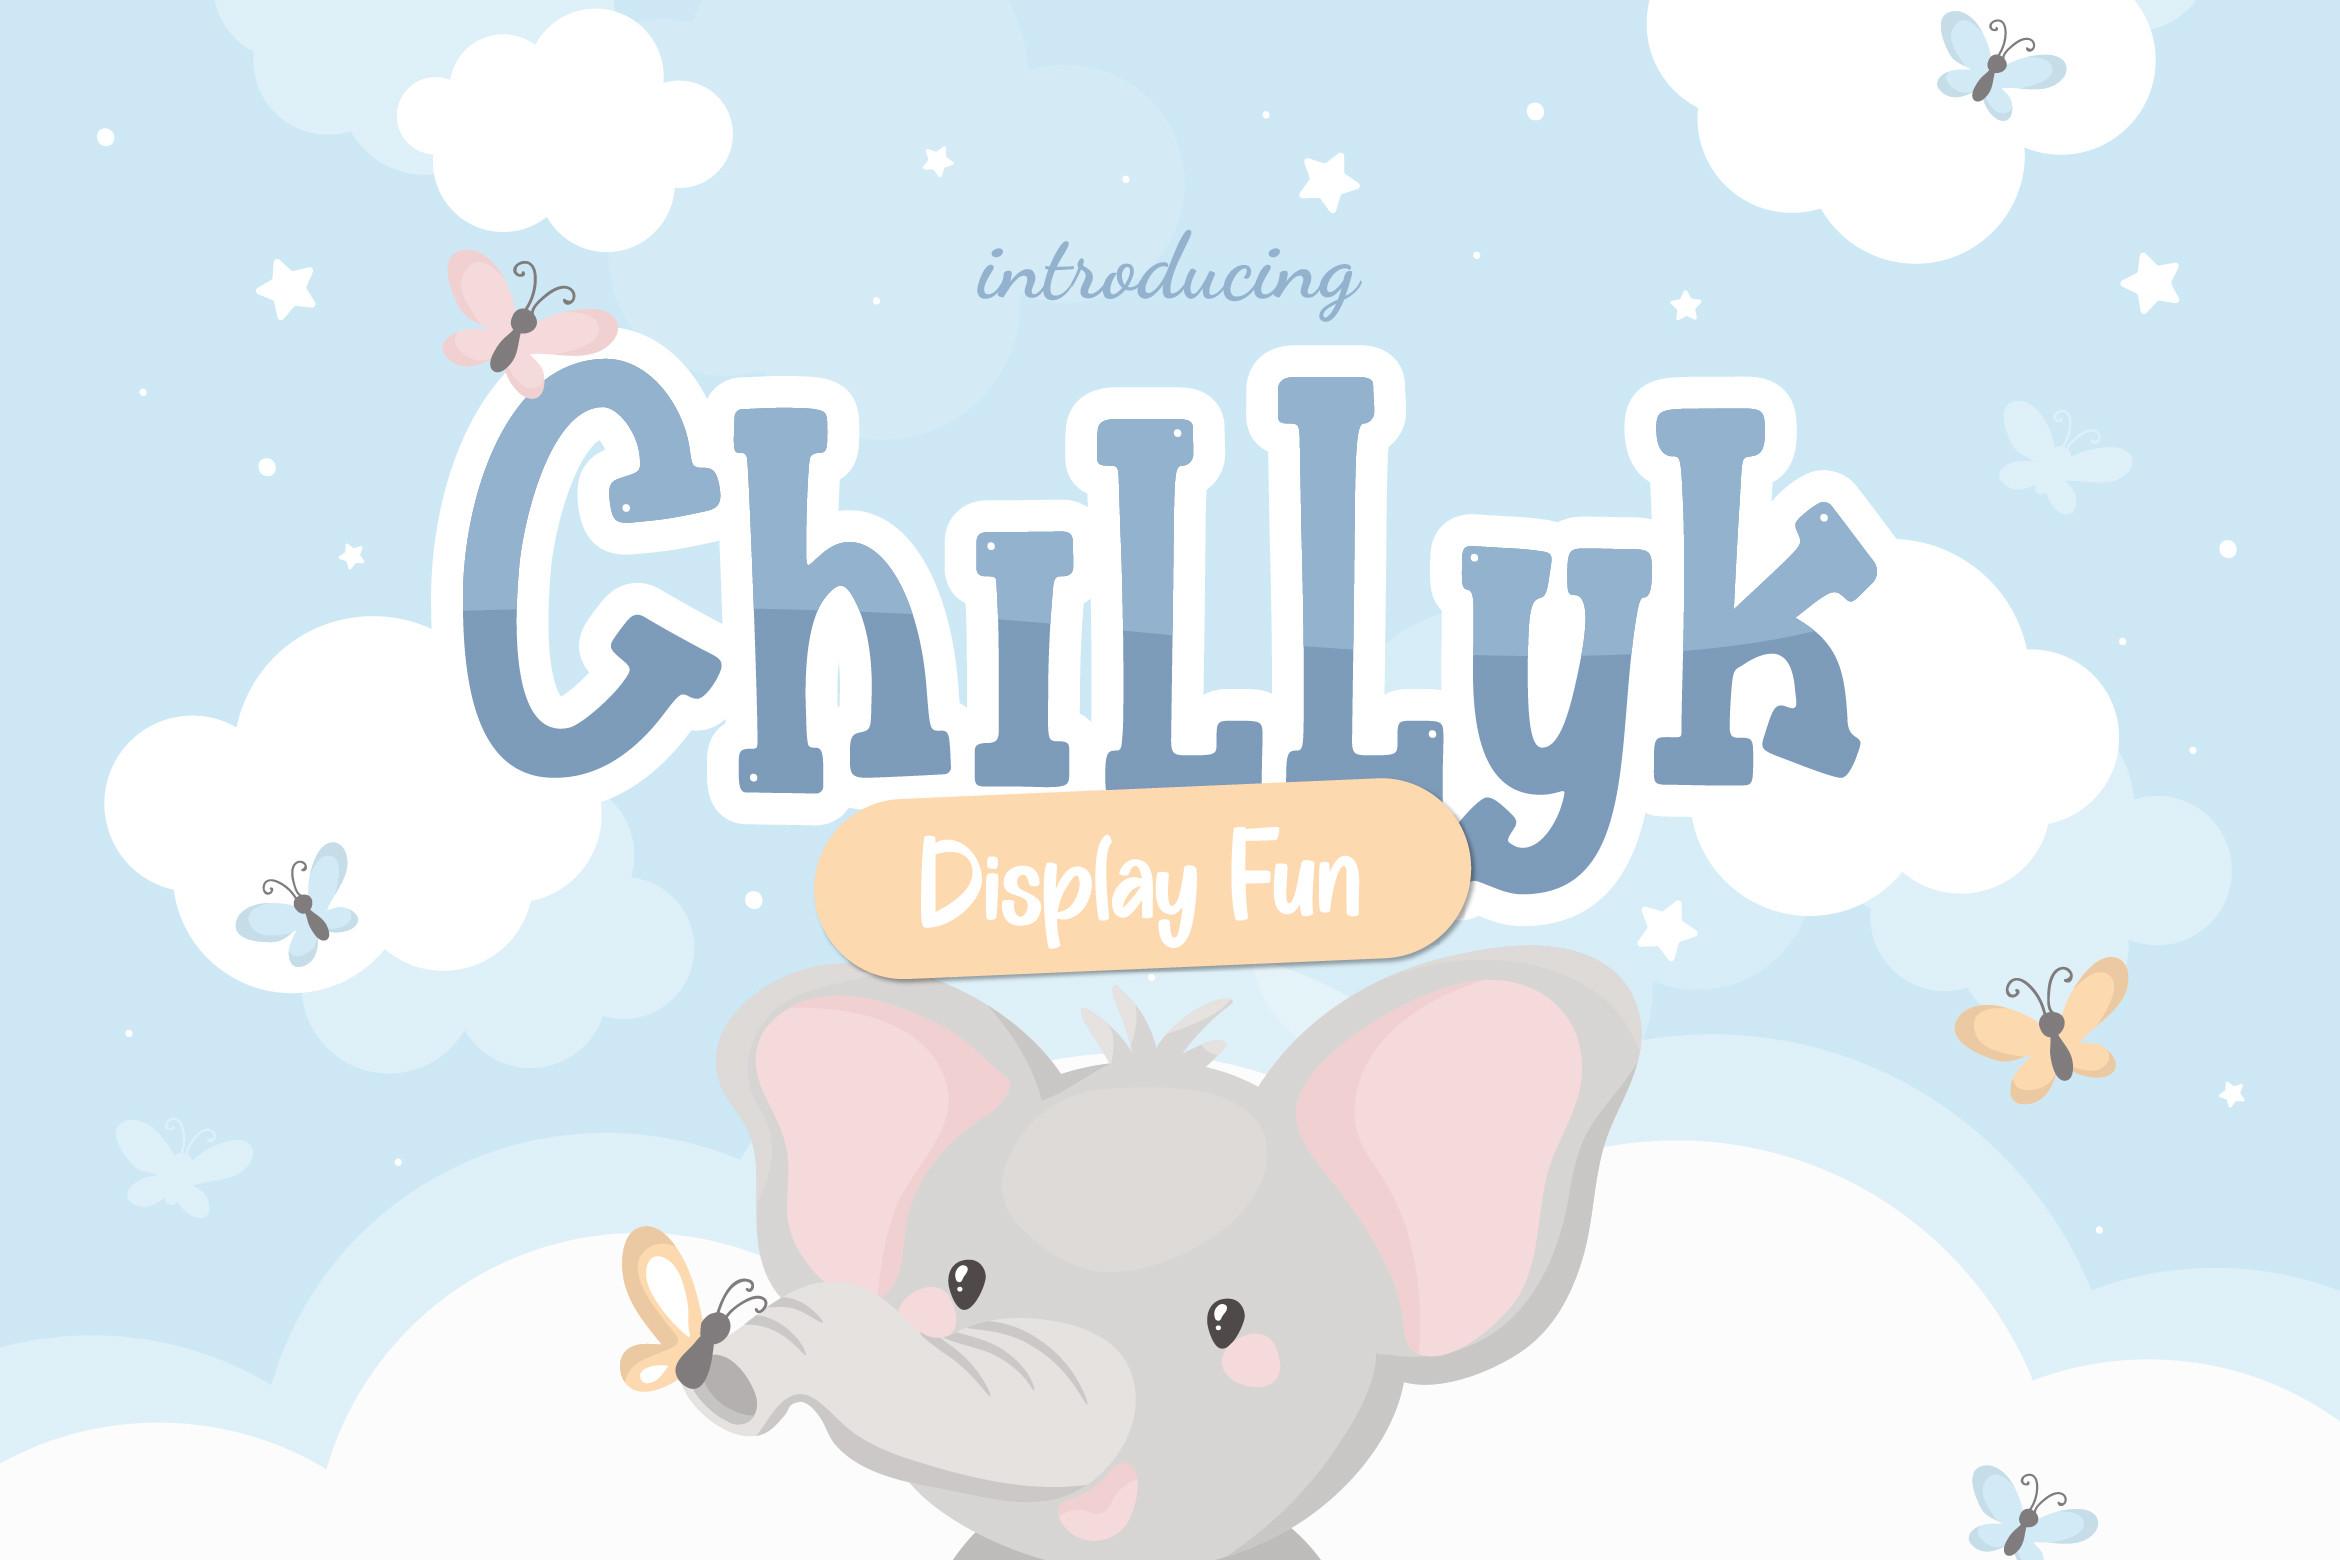 Chillyk Font